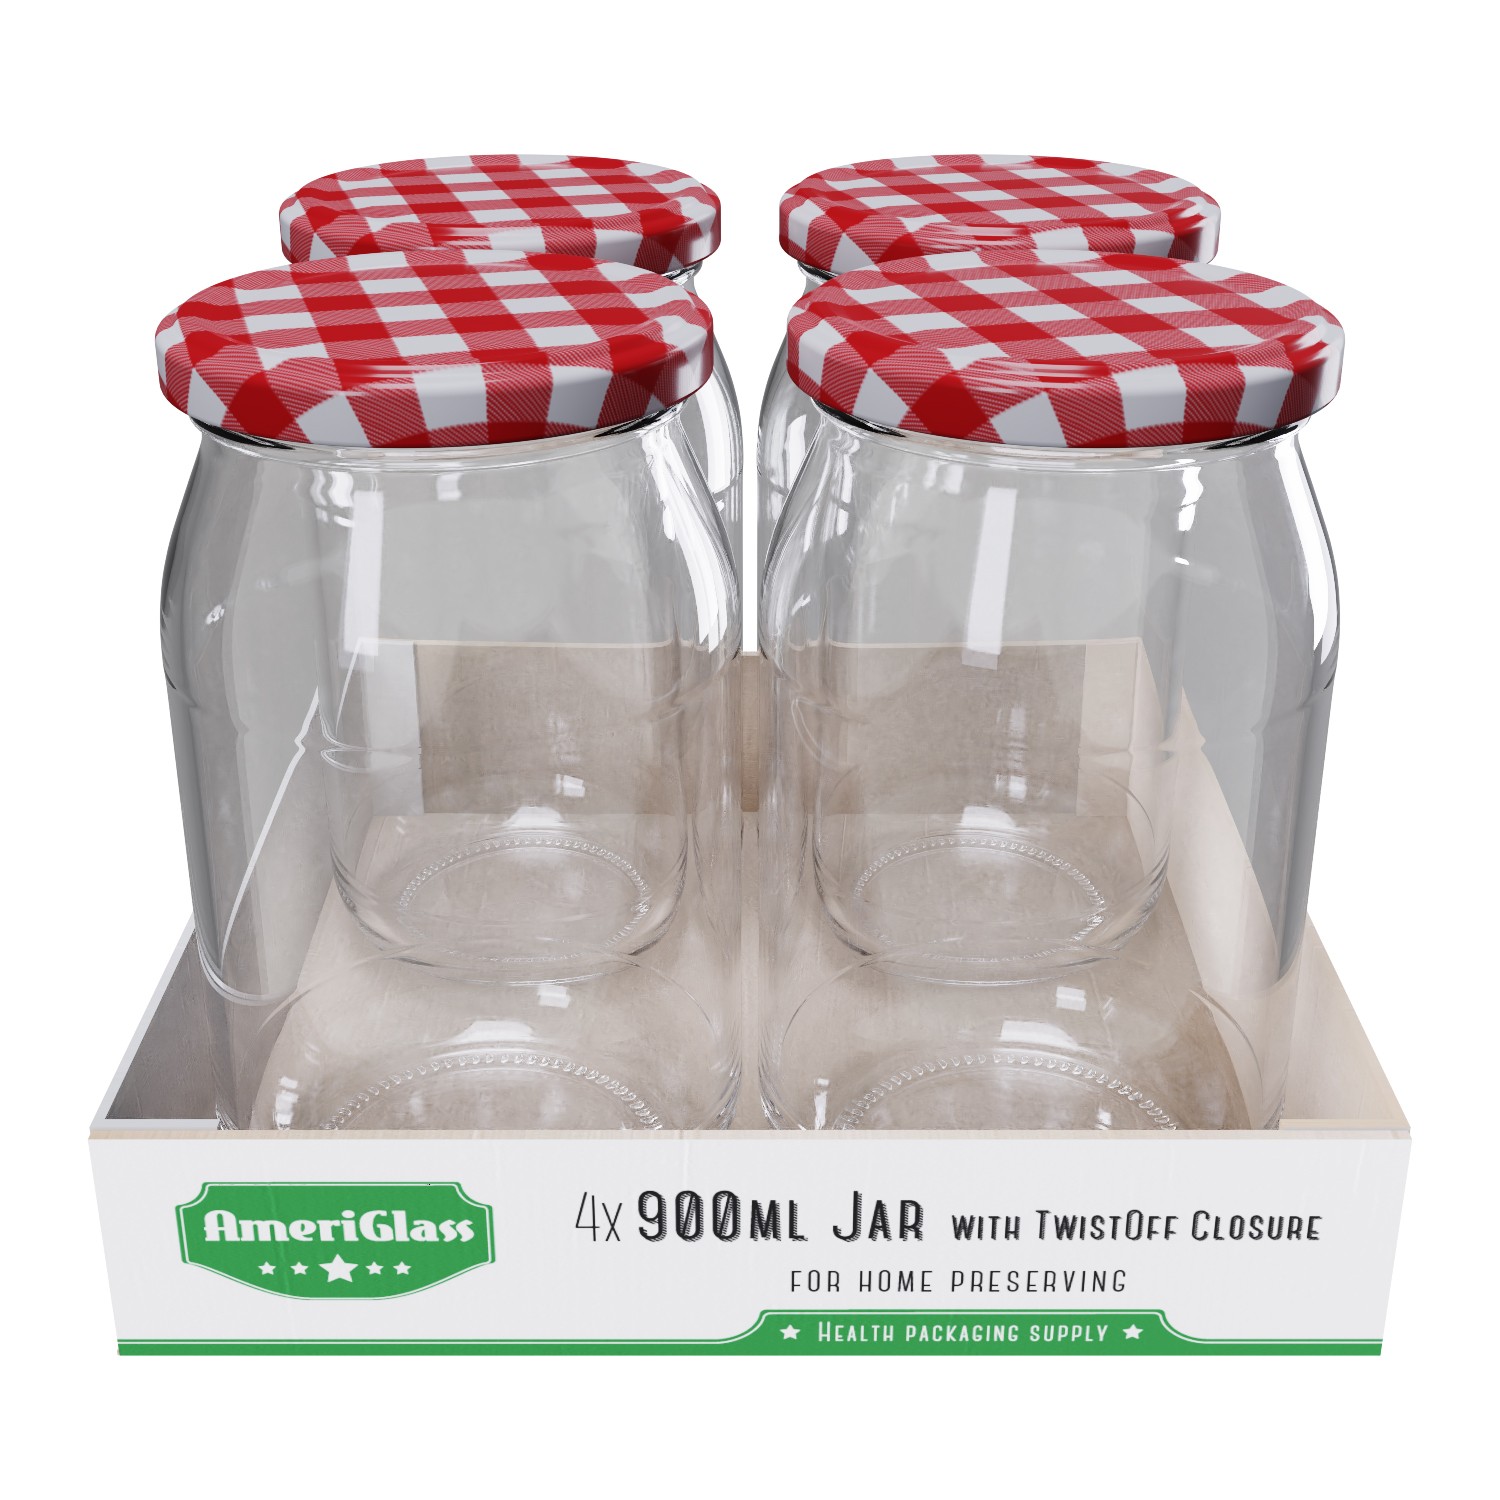 Packaging on trays - New possibility of packaging jars and bottles